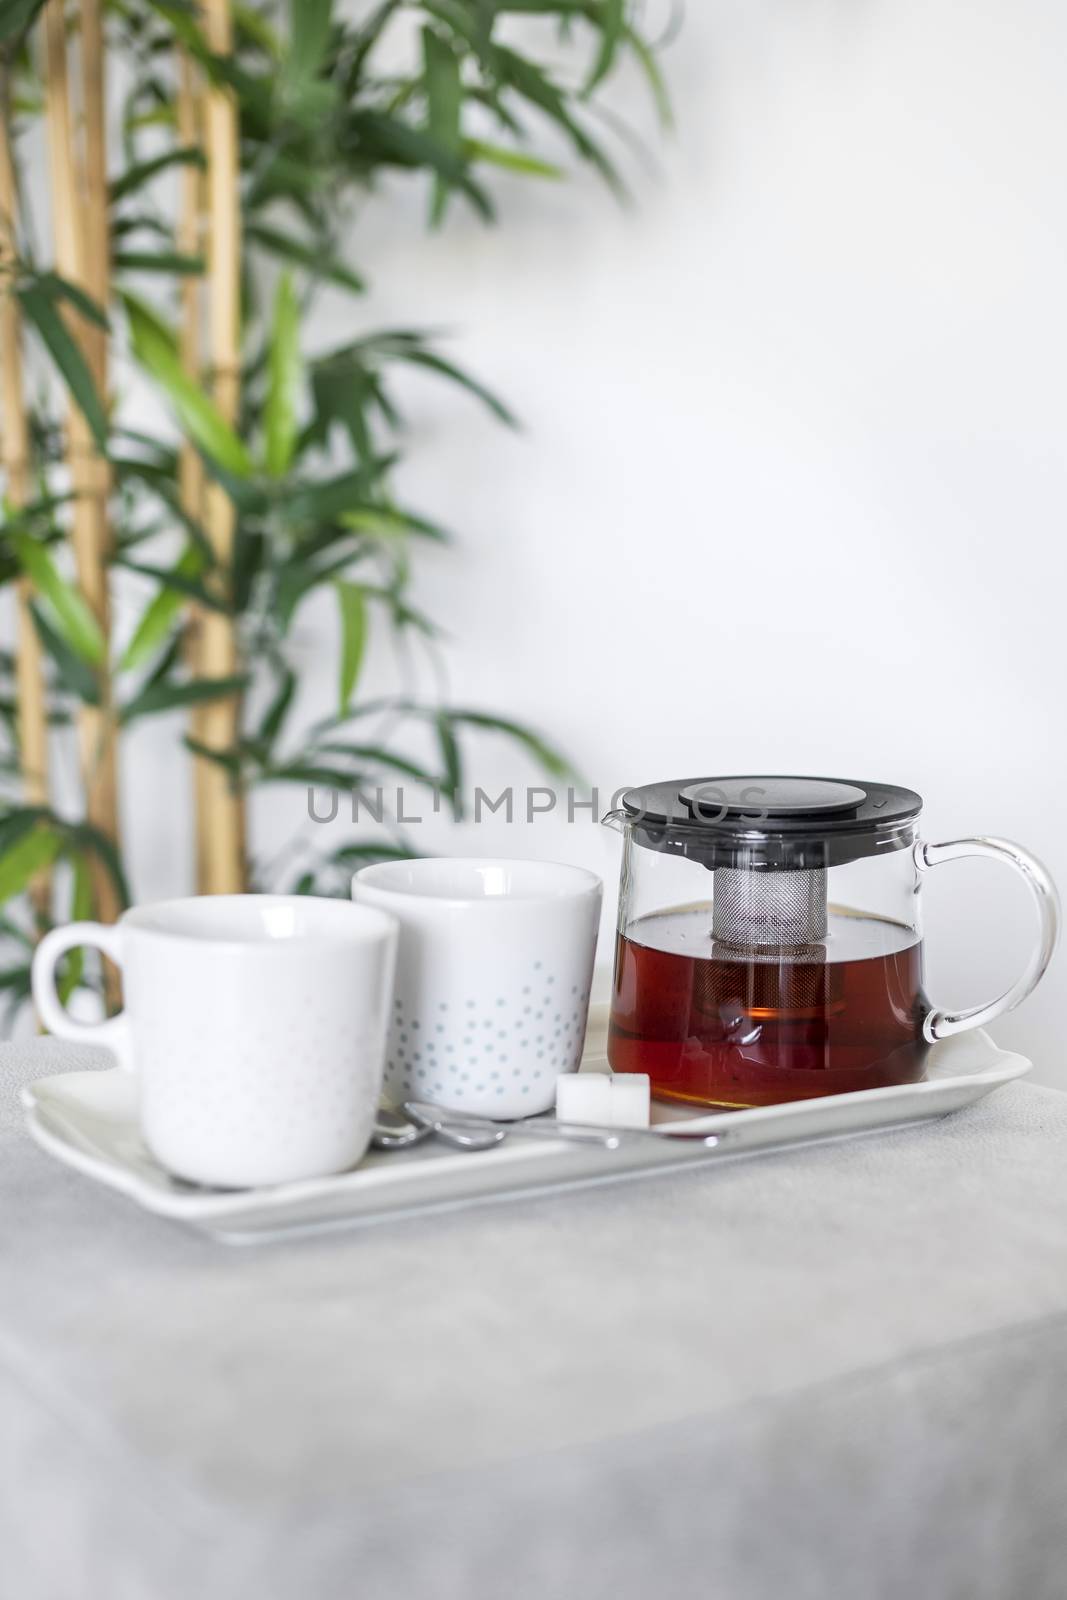 Teapot and cups setup on a tray with bamboo plant in the background by tamas_gabor